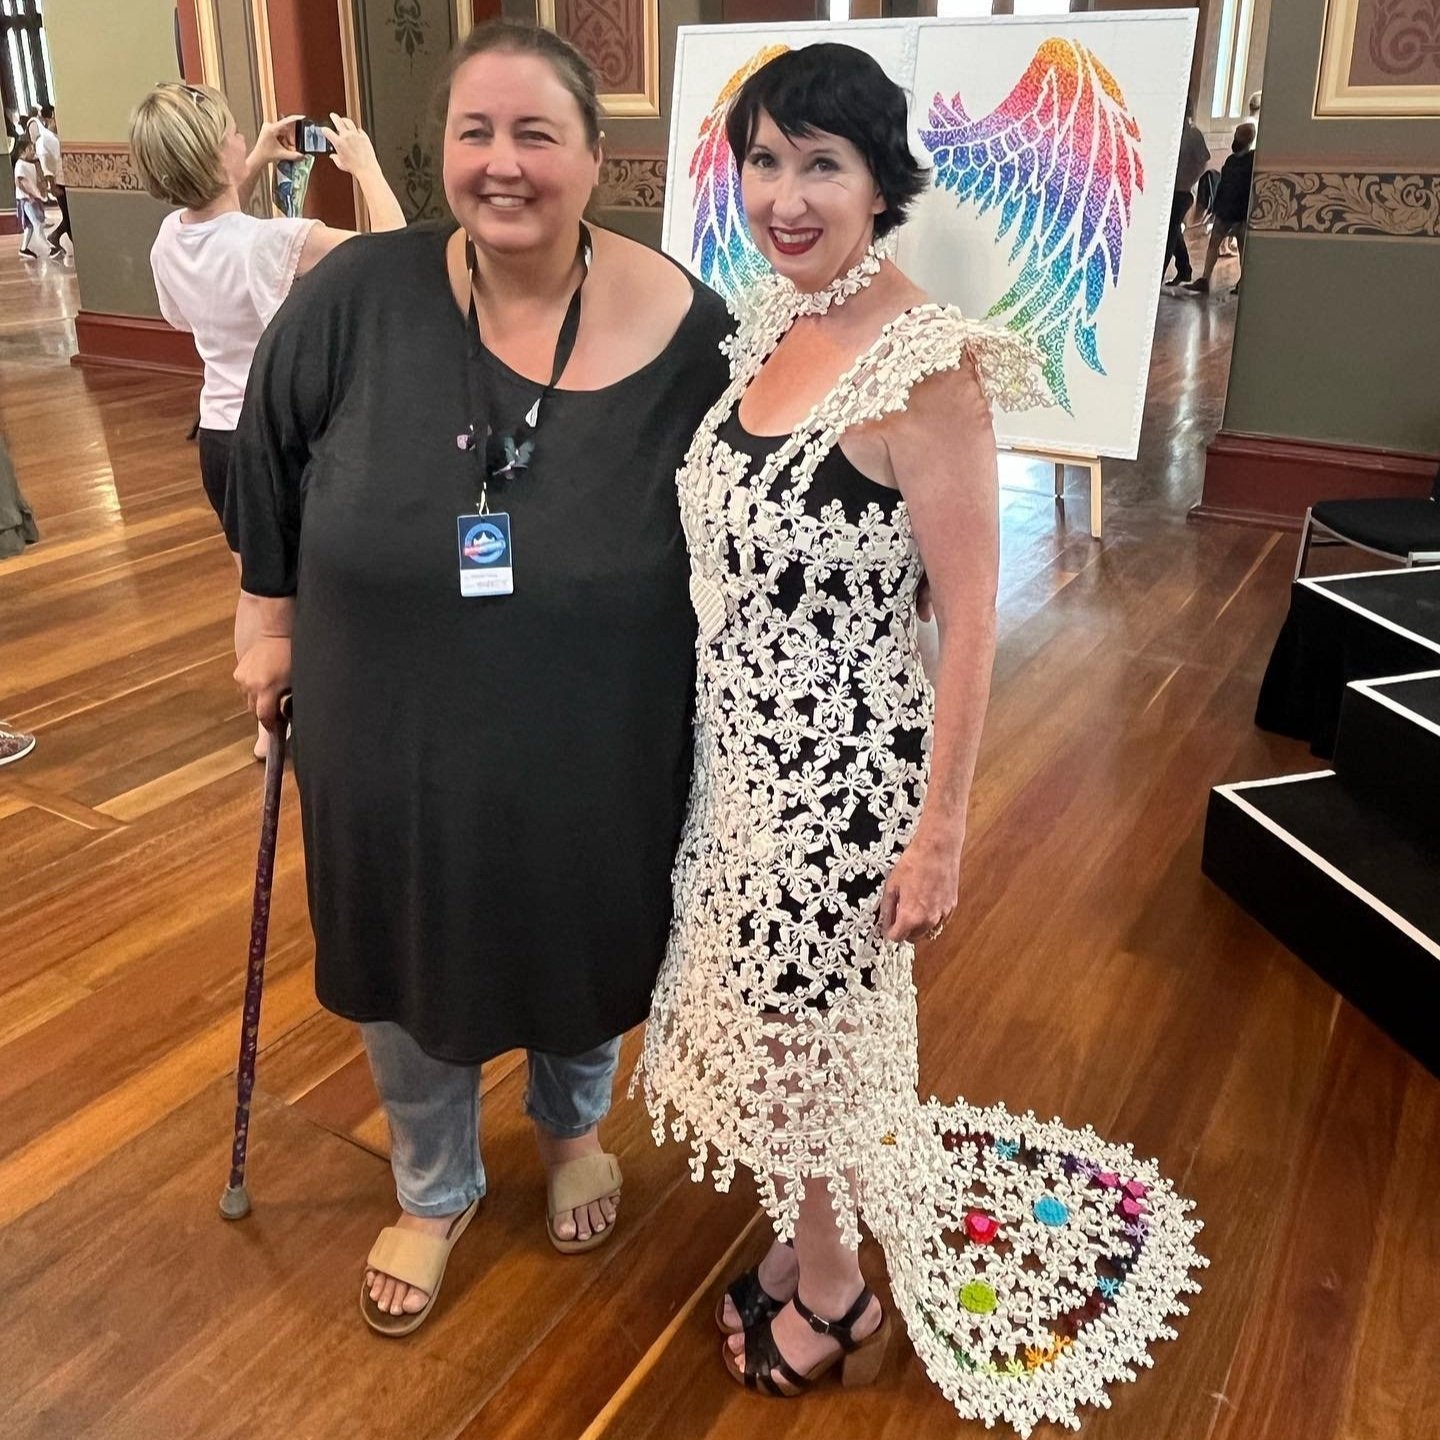 A photo of Veronica Young standing with Fleur Watkins, who competed on LEGO Masters Australia.  Fleur is wearing the LEGO wedding dress made by Veronica.